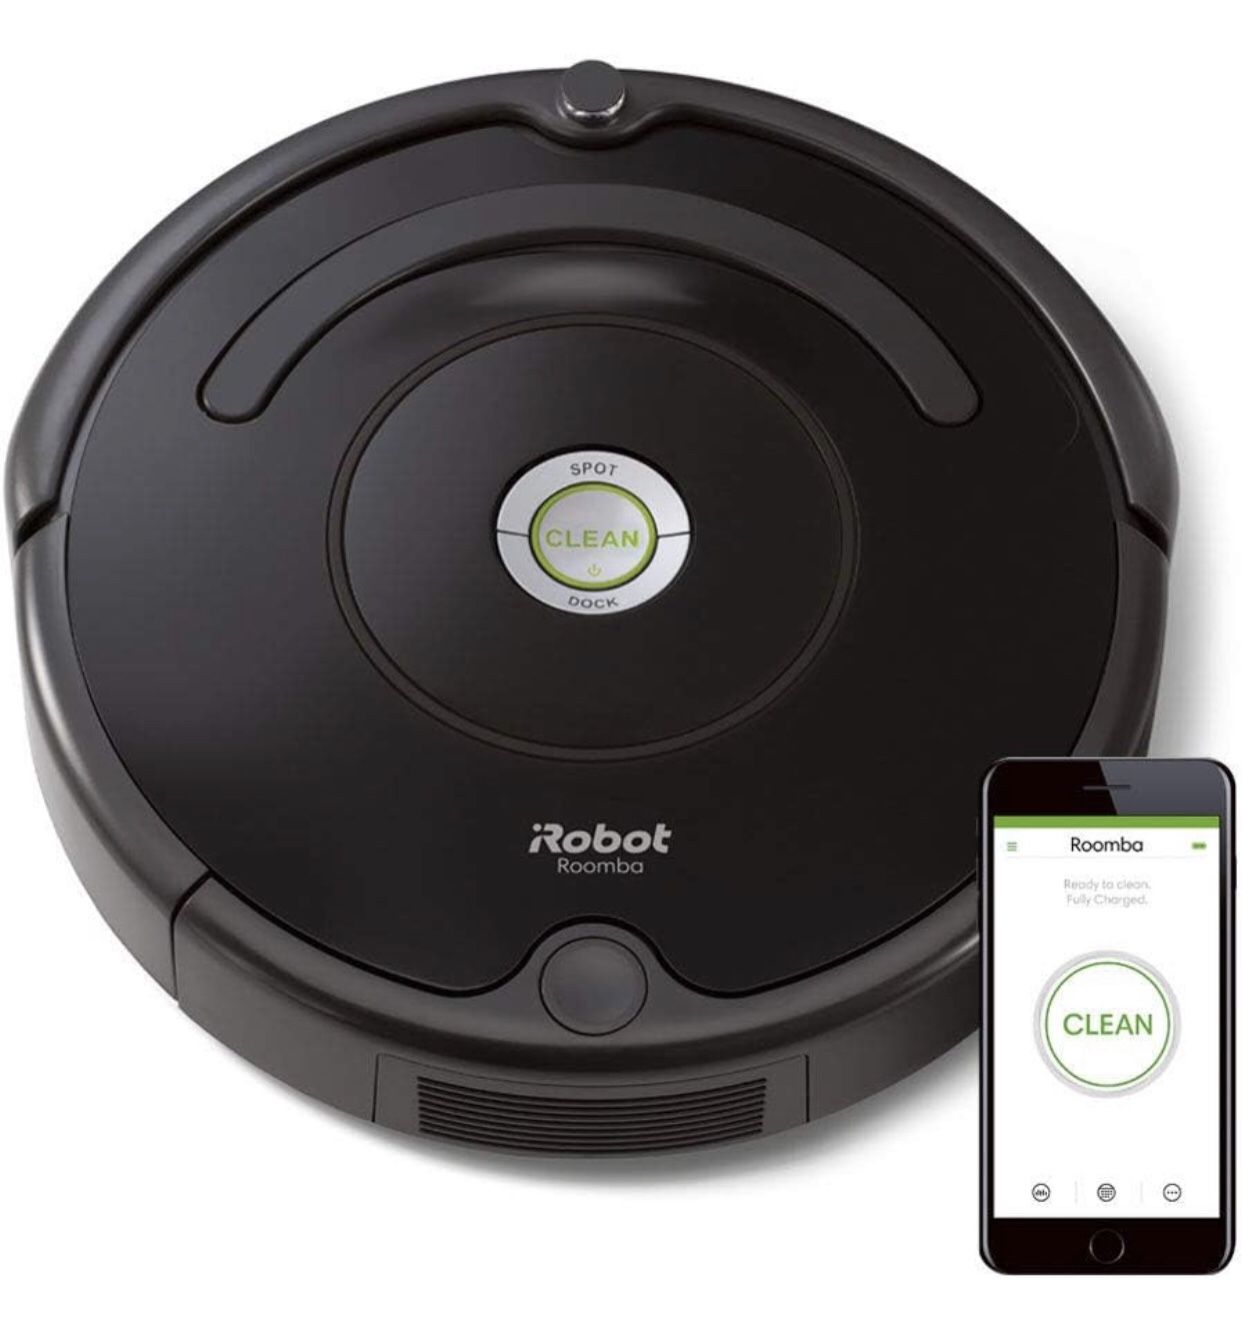 CLEAN SMARTER - The 600 series is a great way to begin cleaning your home smarter. Just schedule it to clean up daily dirt, dust, and debris with the 